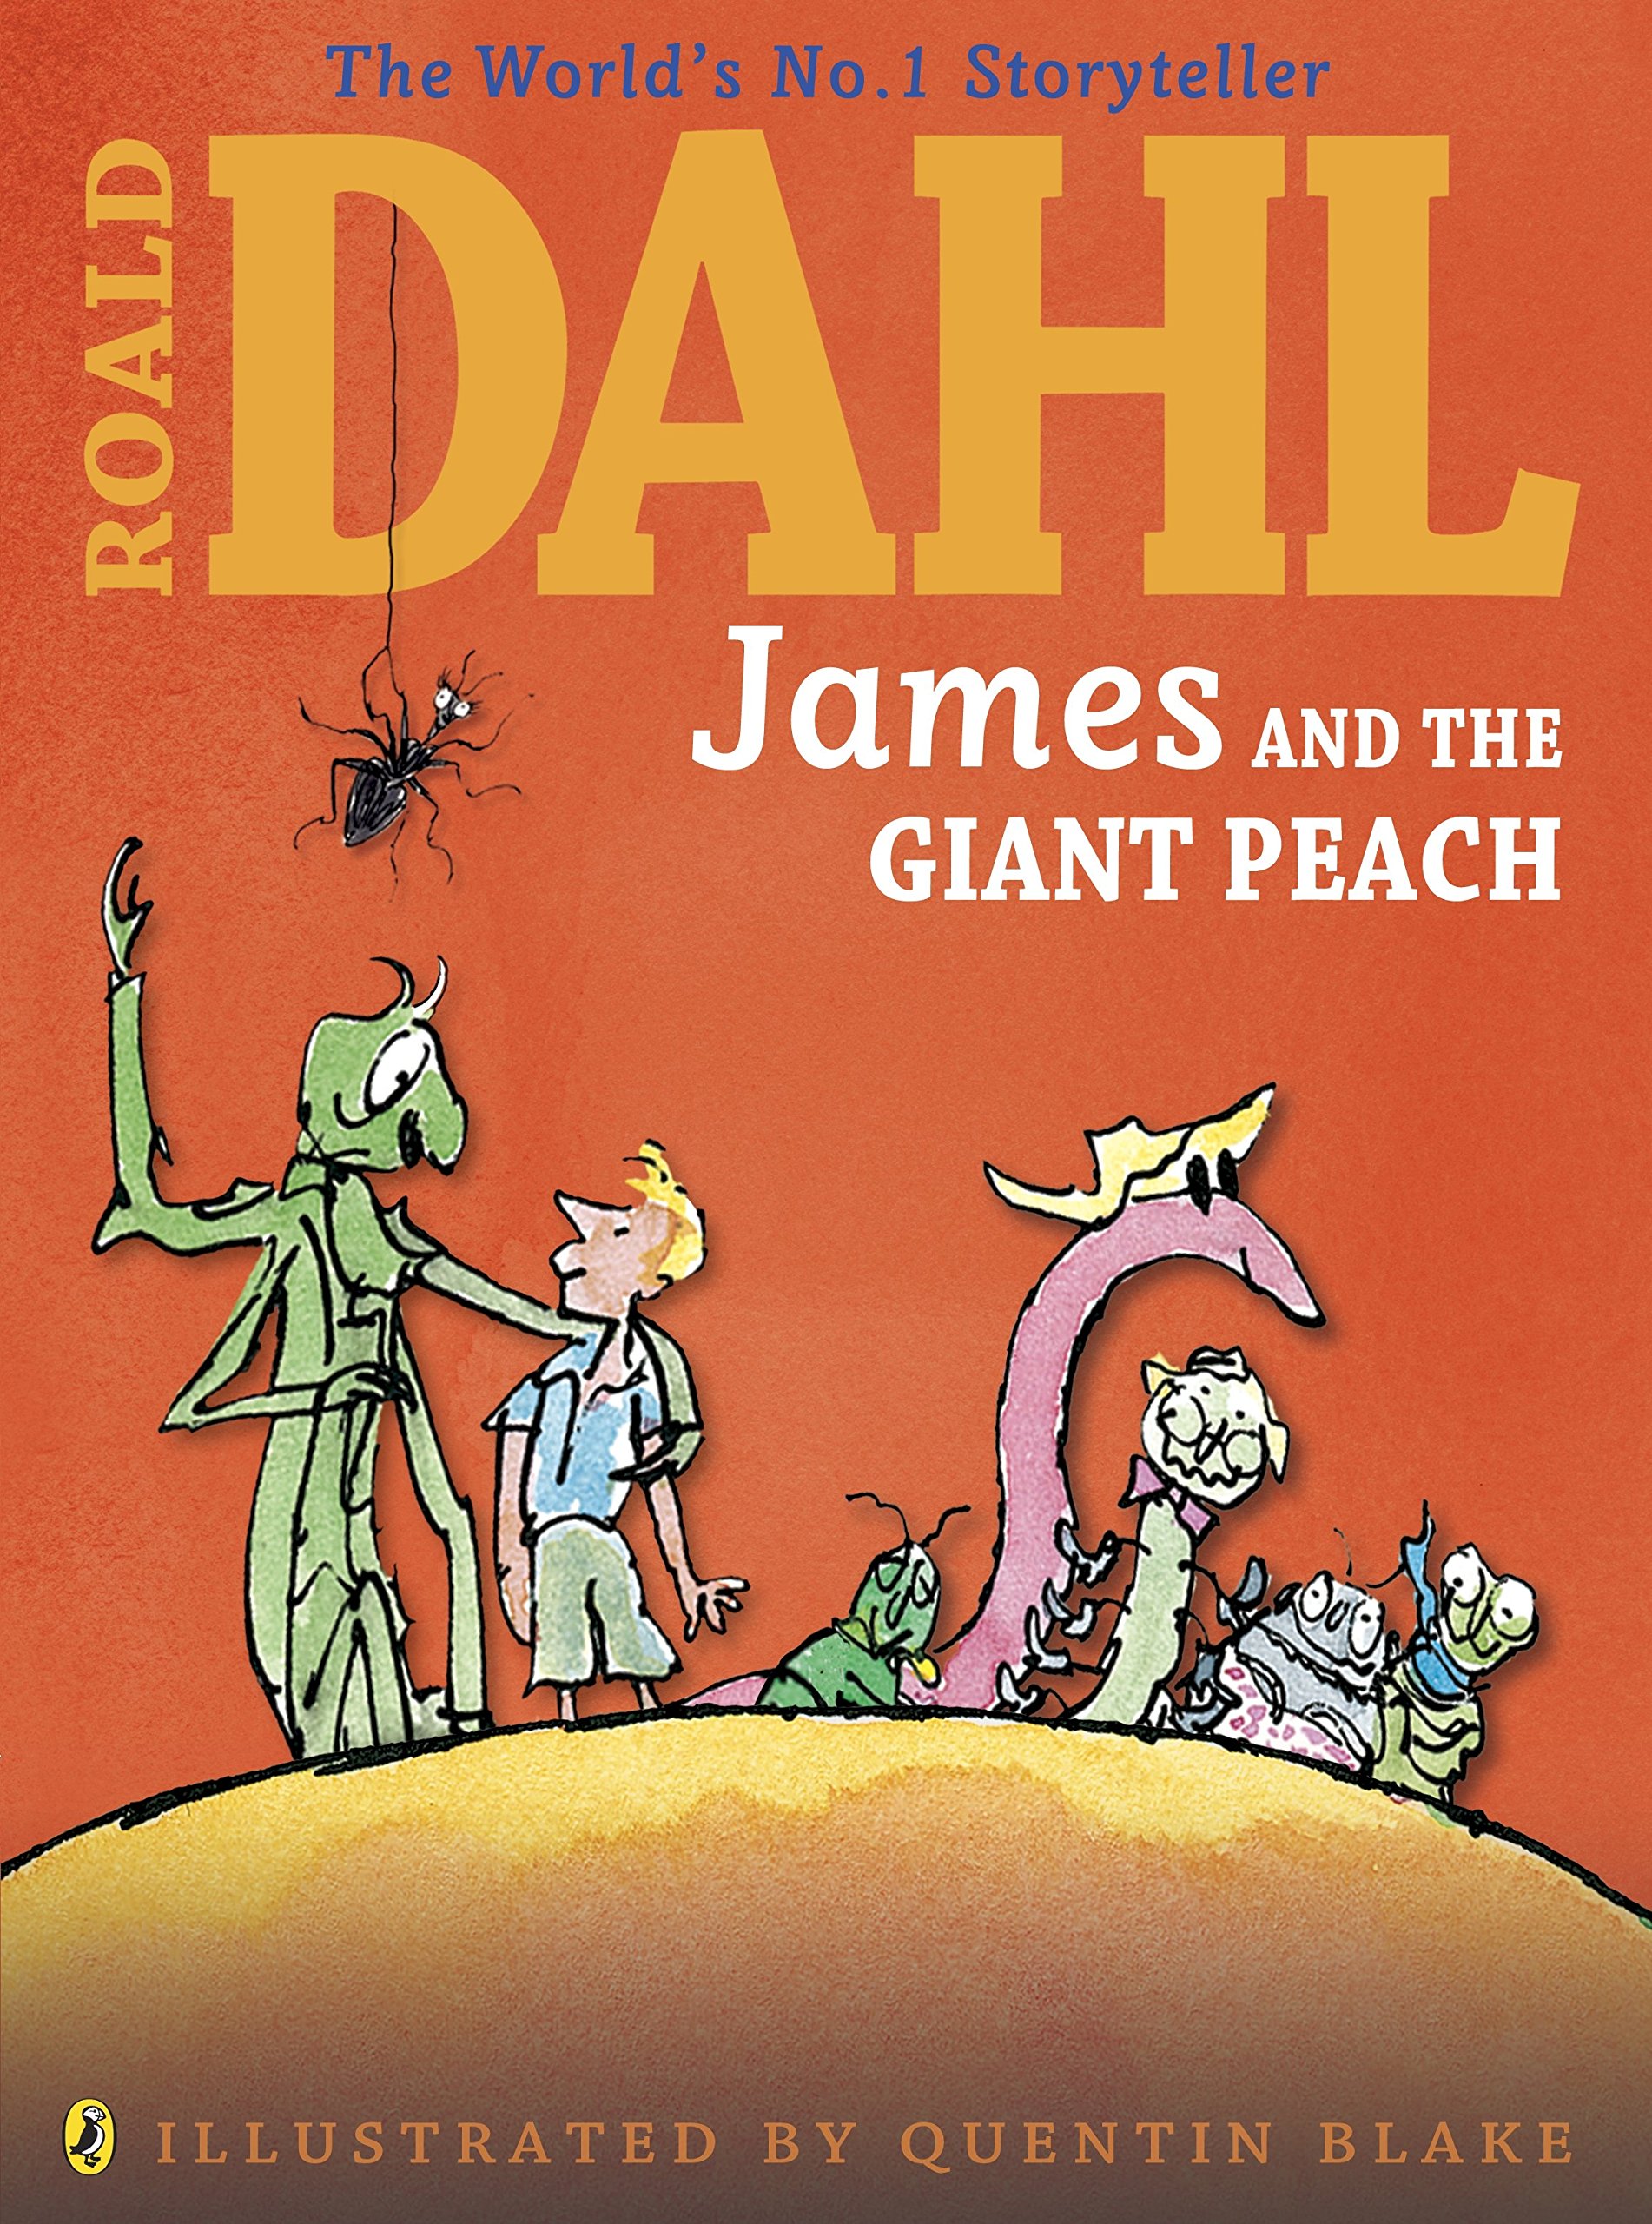 book james and the giant peach